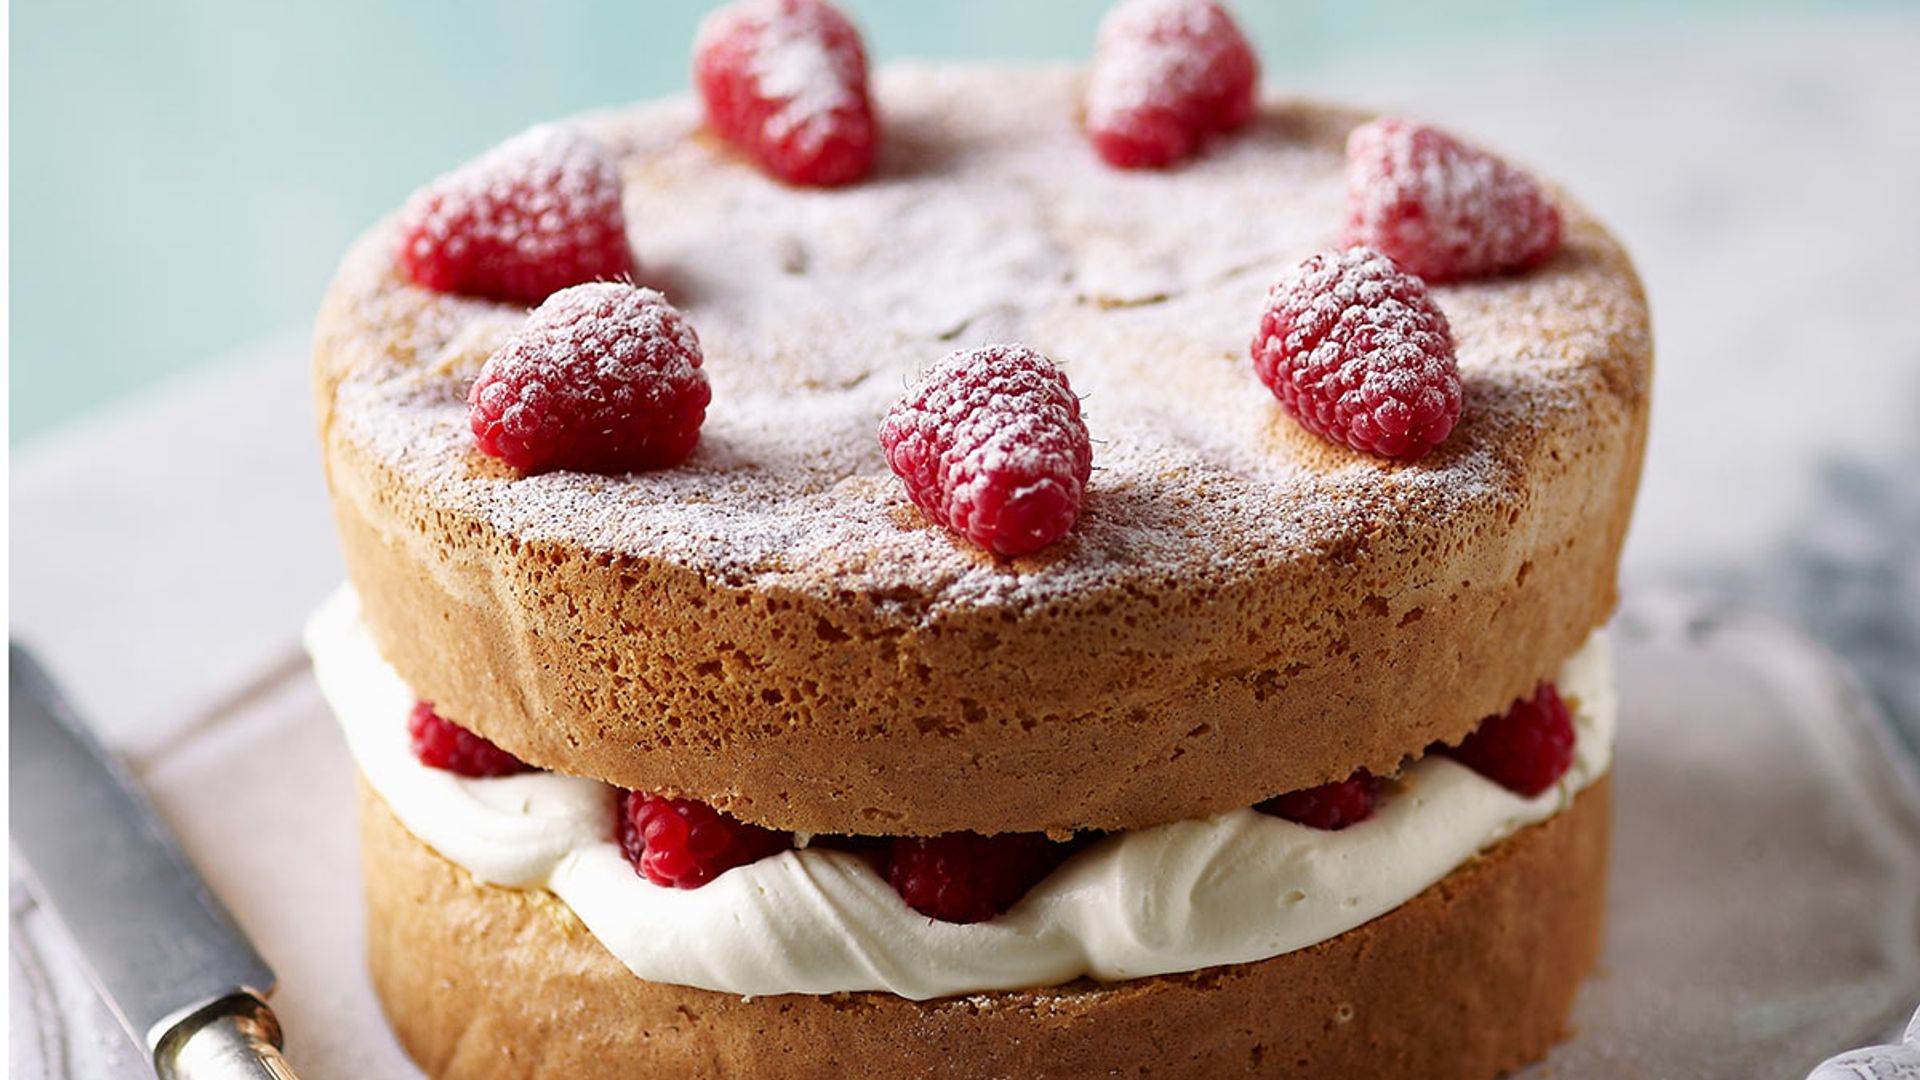 Think you can bake a genoise sponge better than the GBBO bakers? We have the recipe for you